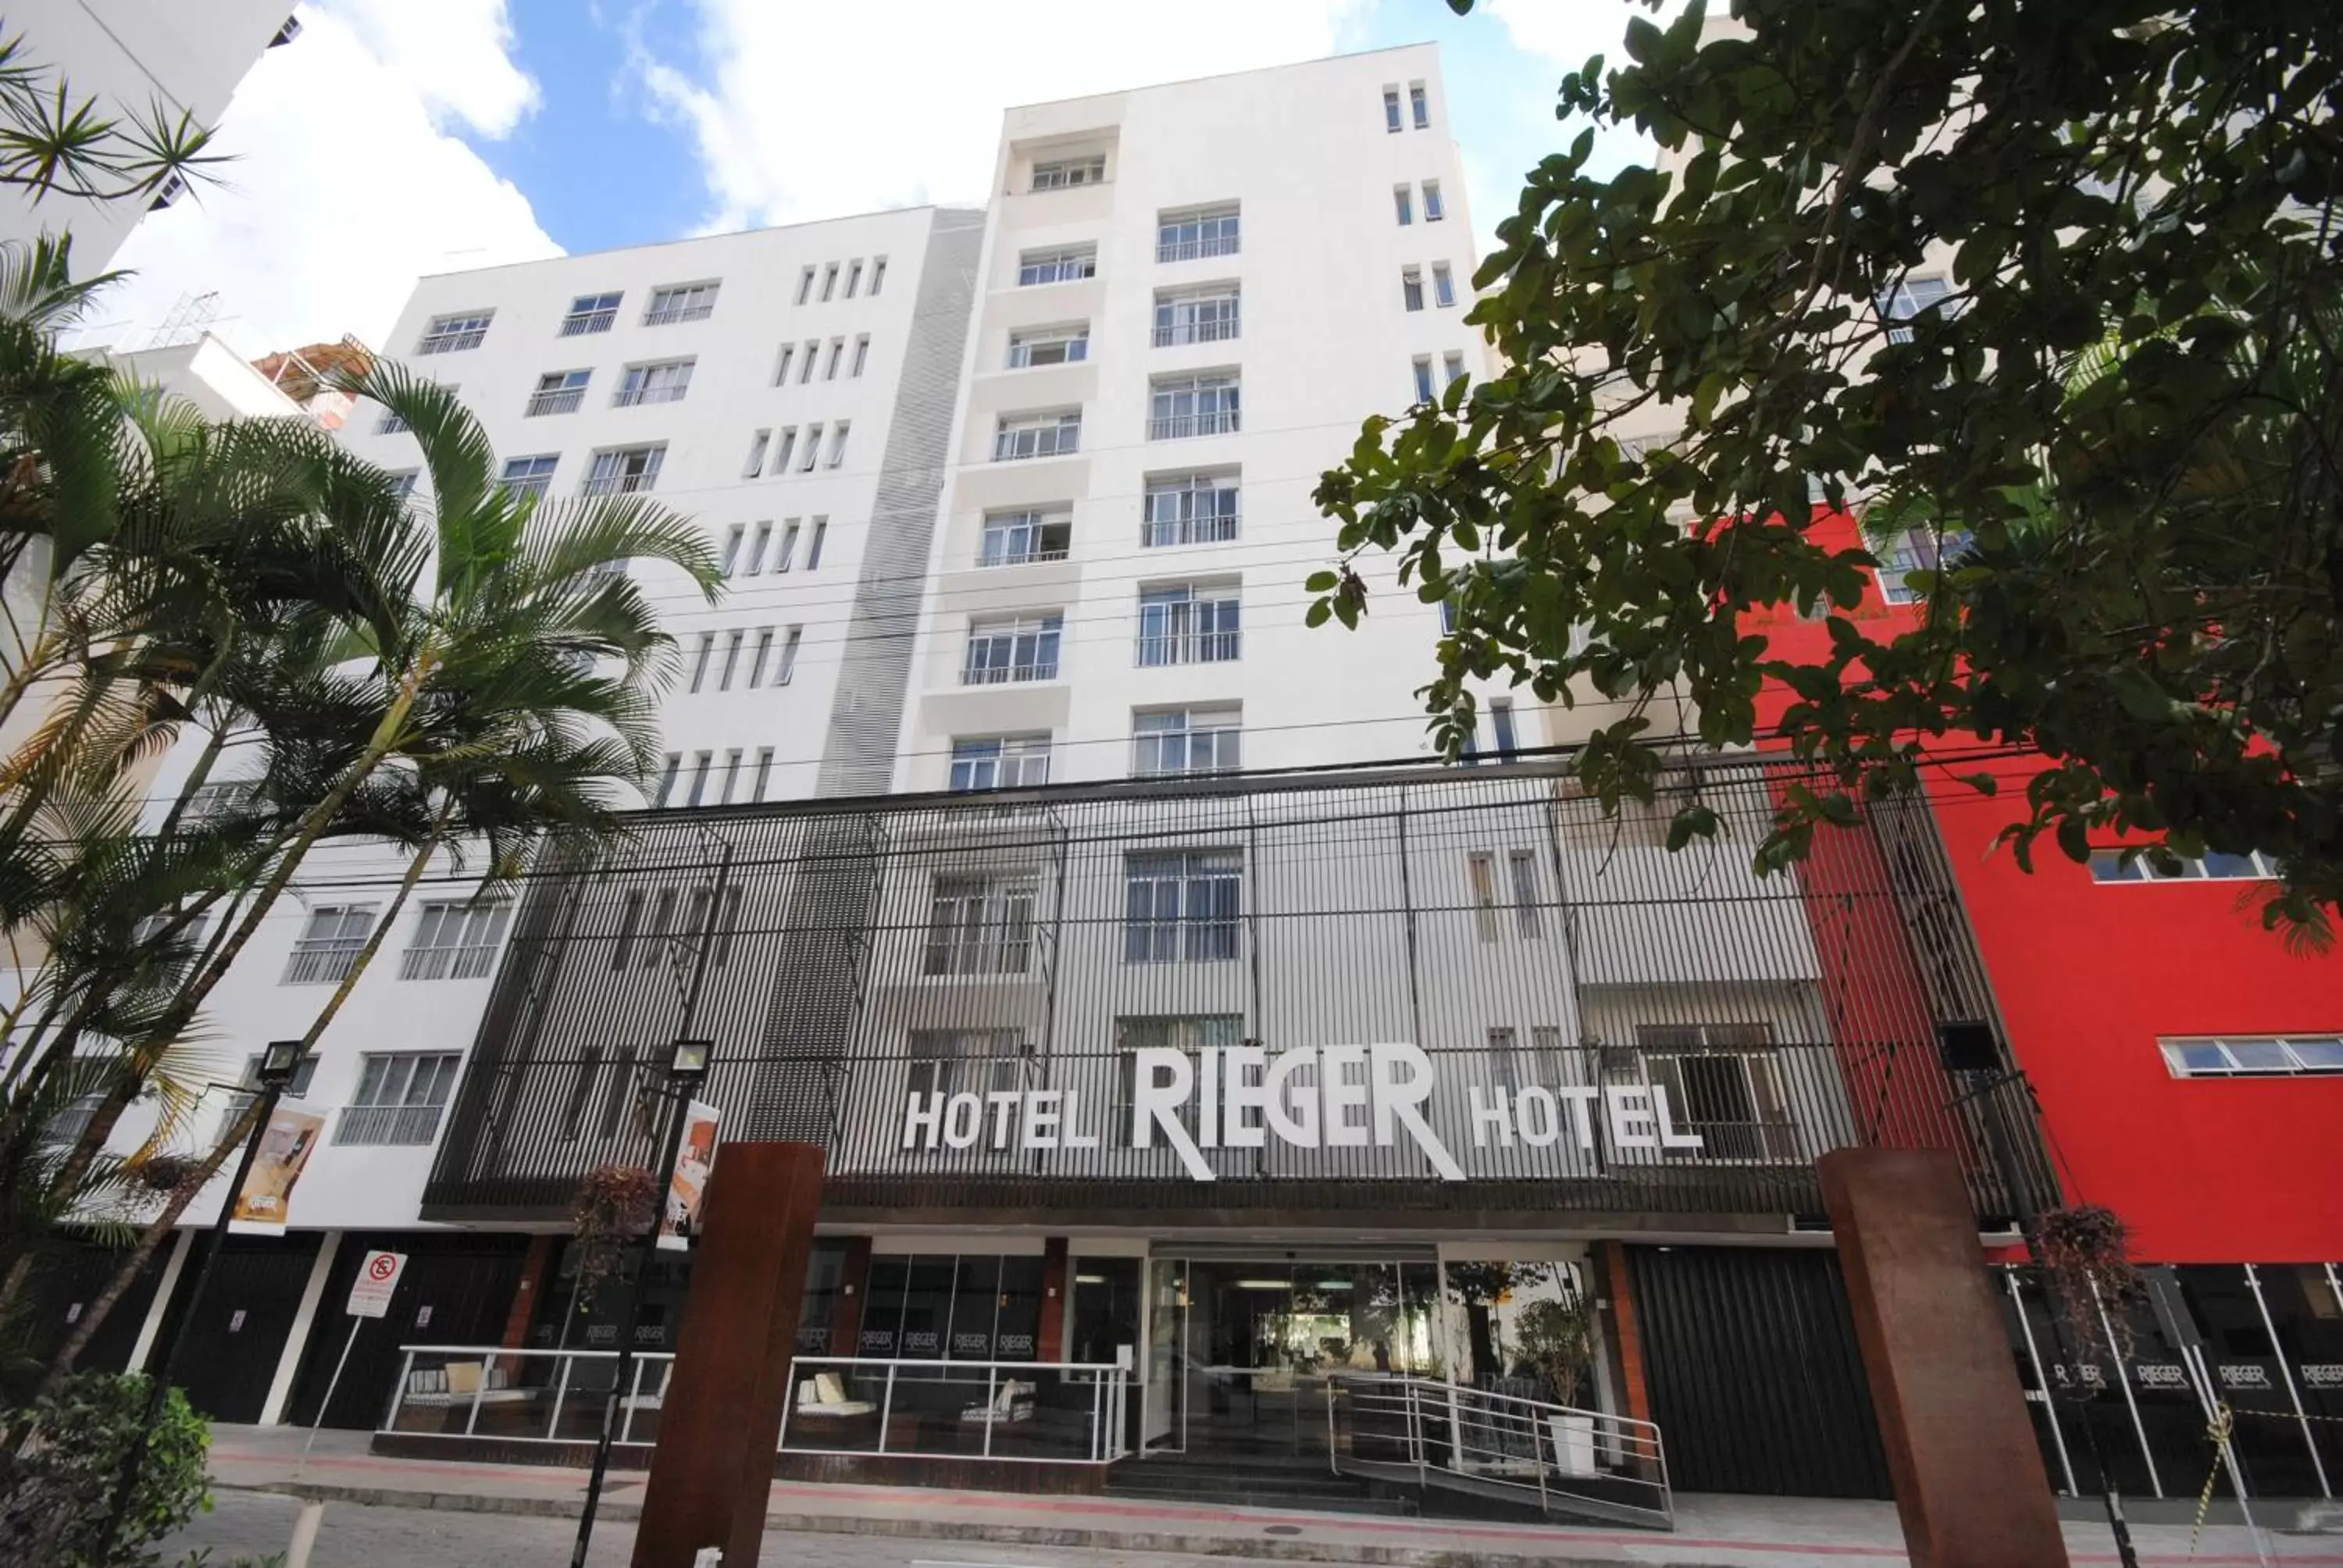 Property Building in Hotel Rieger